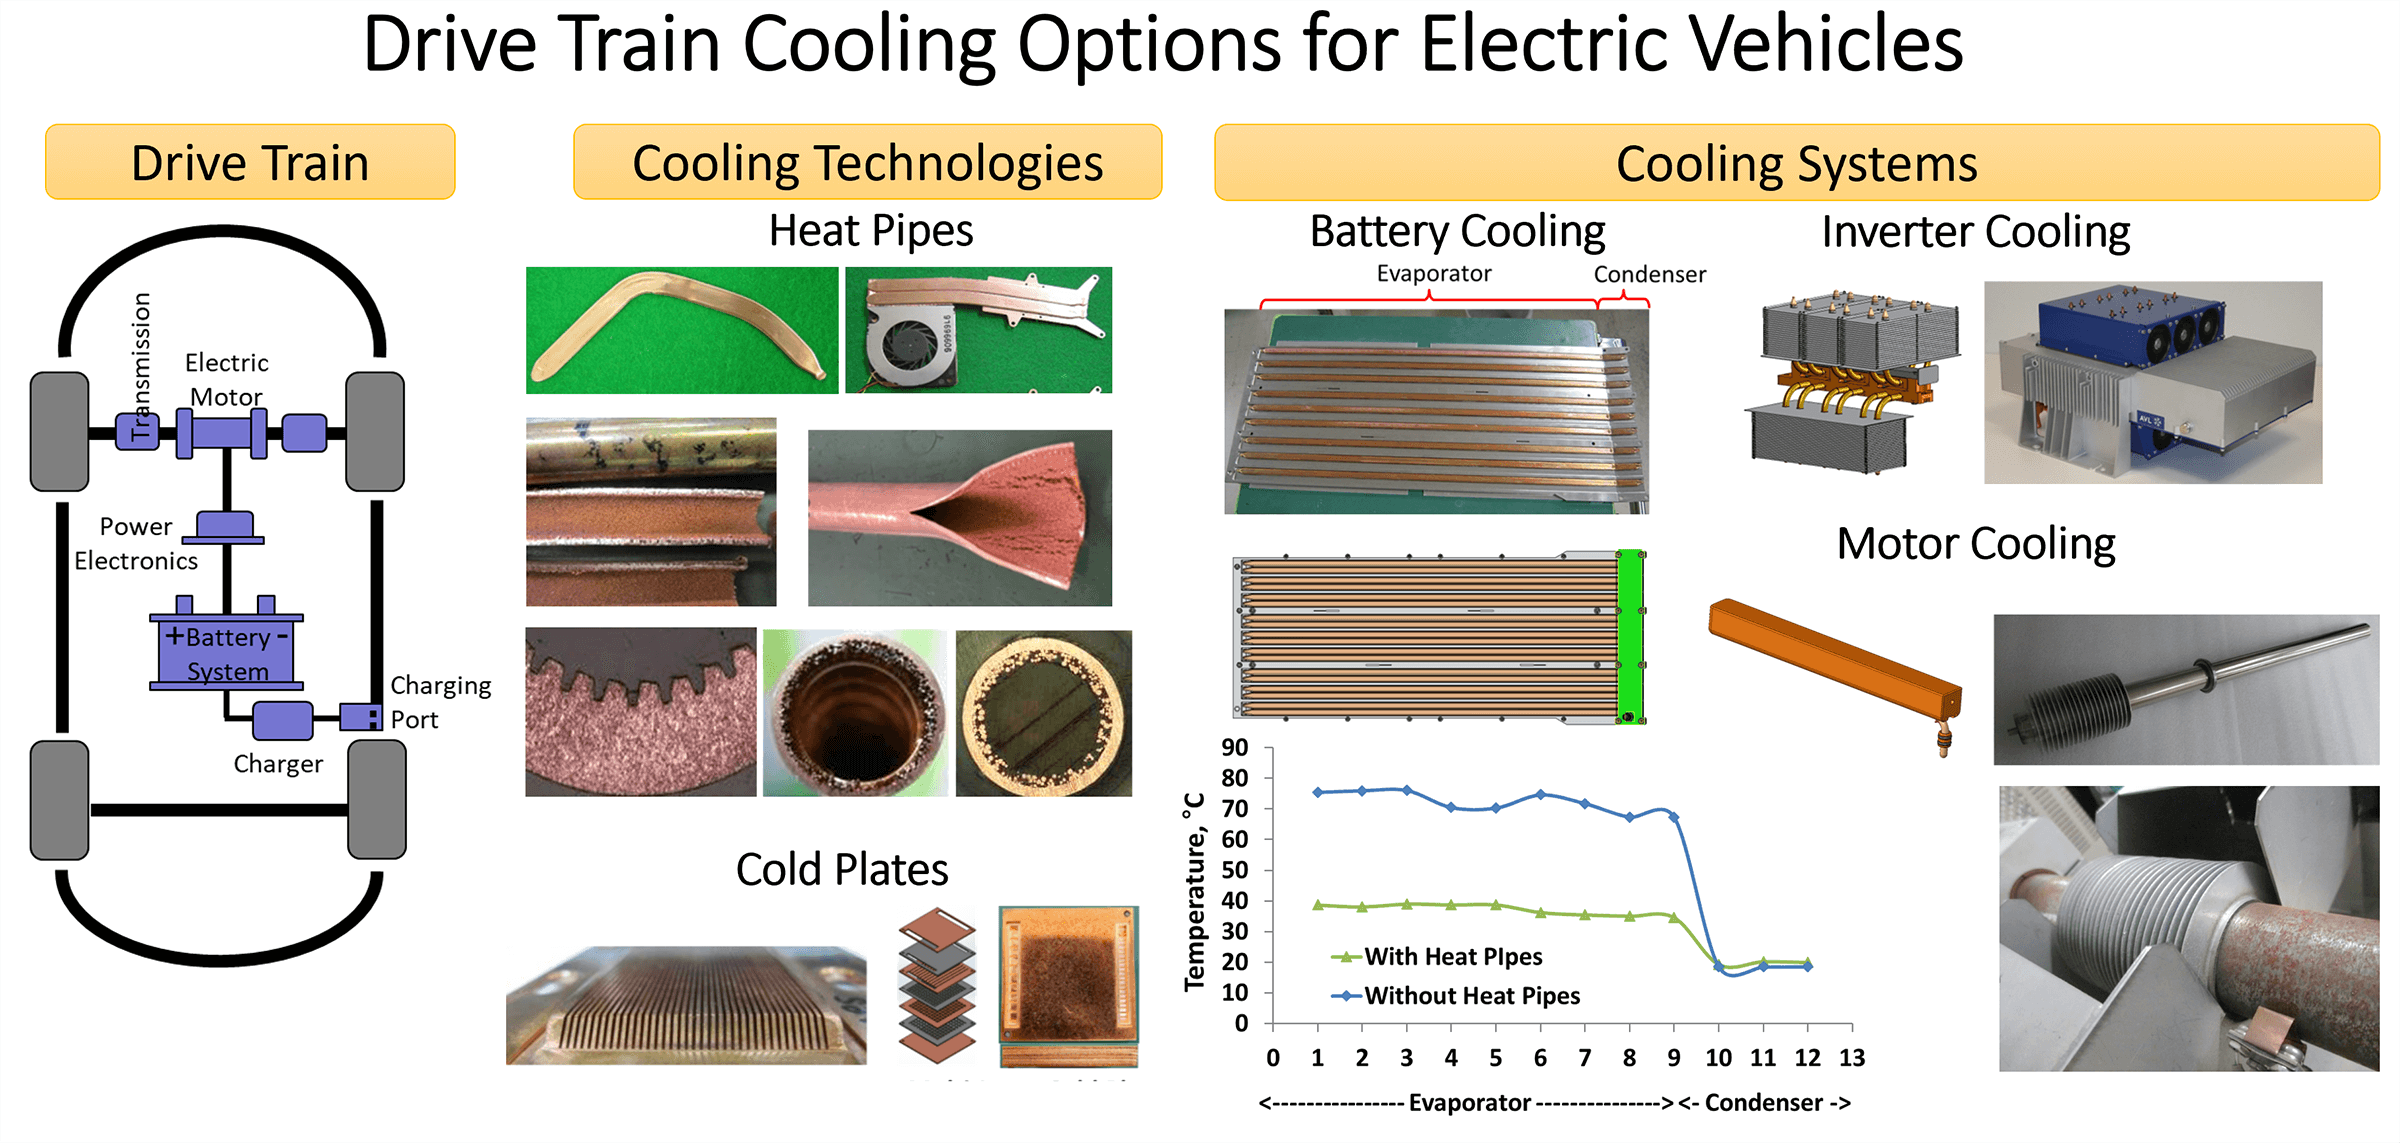 Drive Train Cooling Options for Electric Vehicles